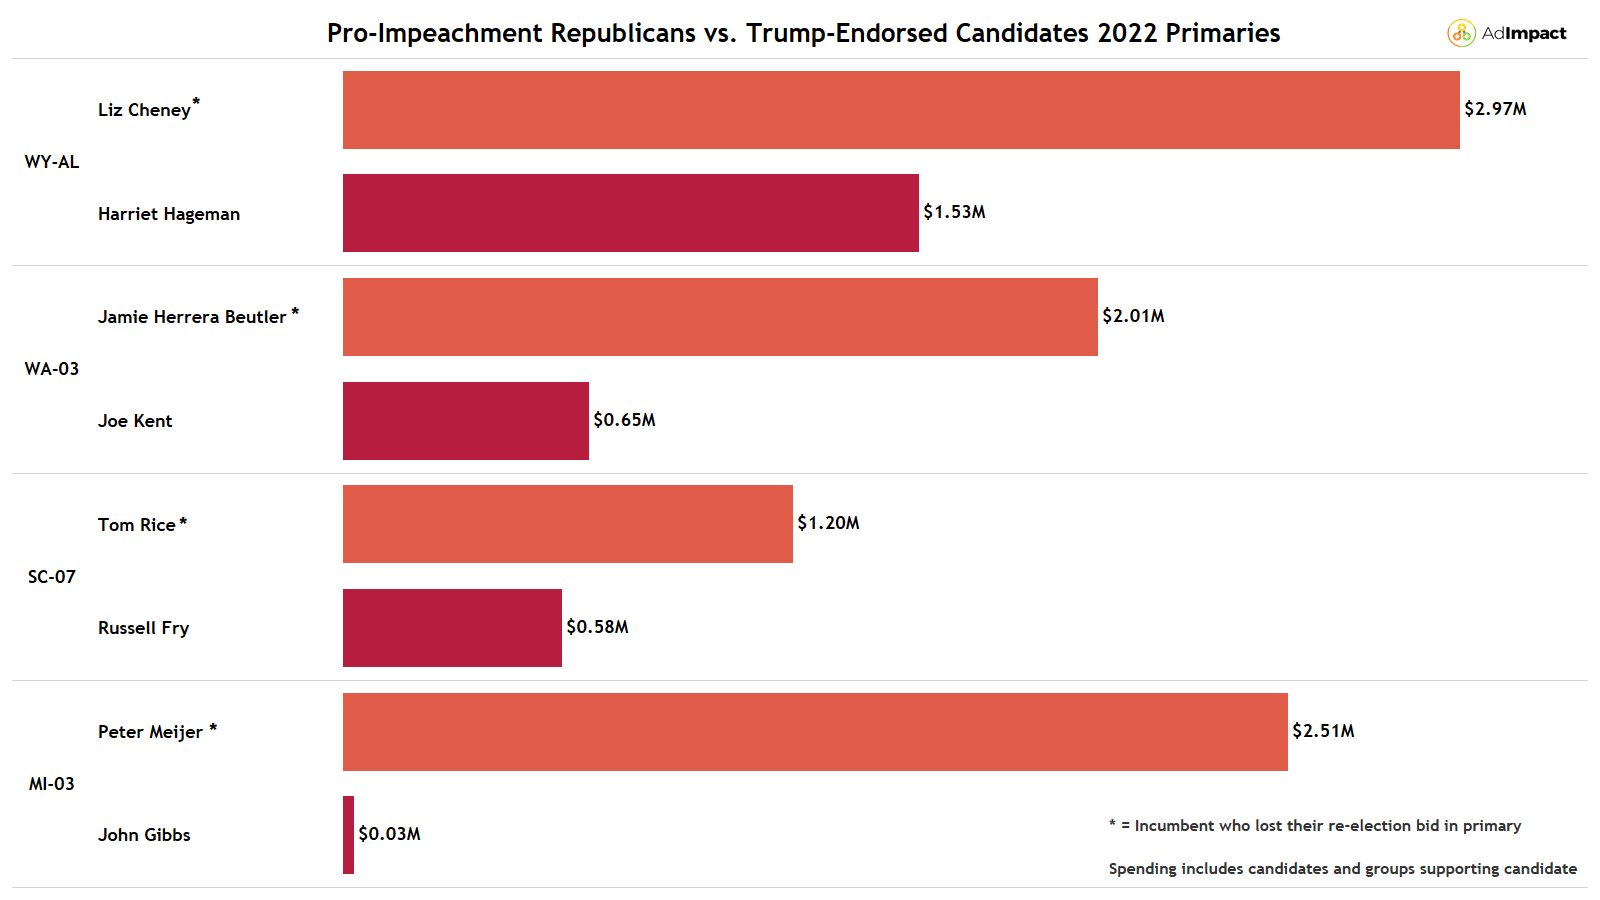 A bar chart showing spending with pro-impeachment Republicans